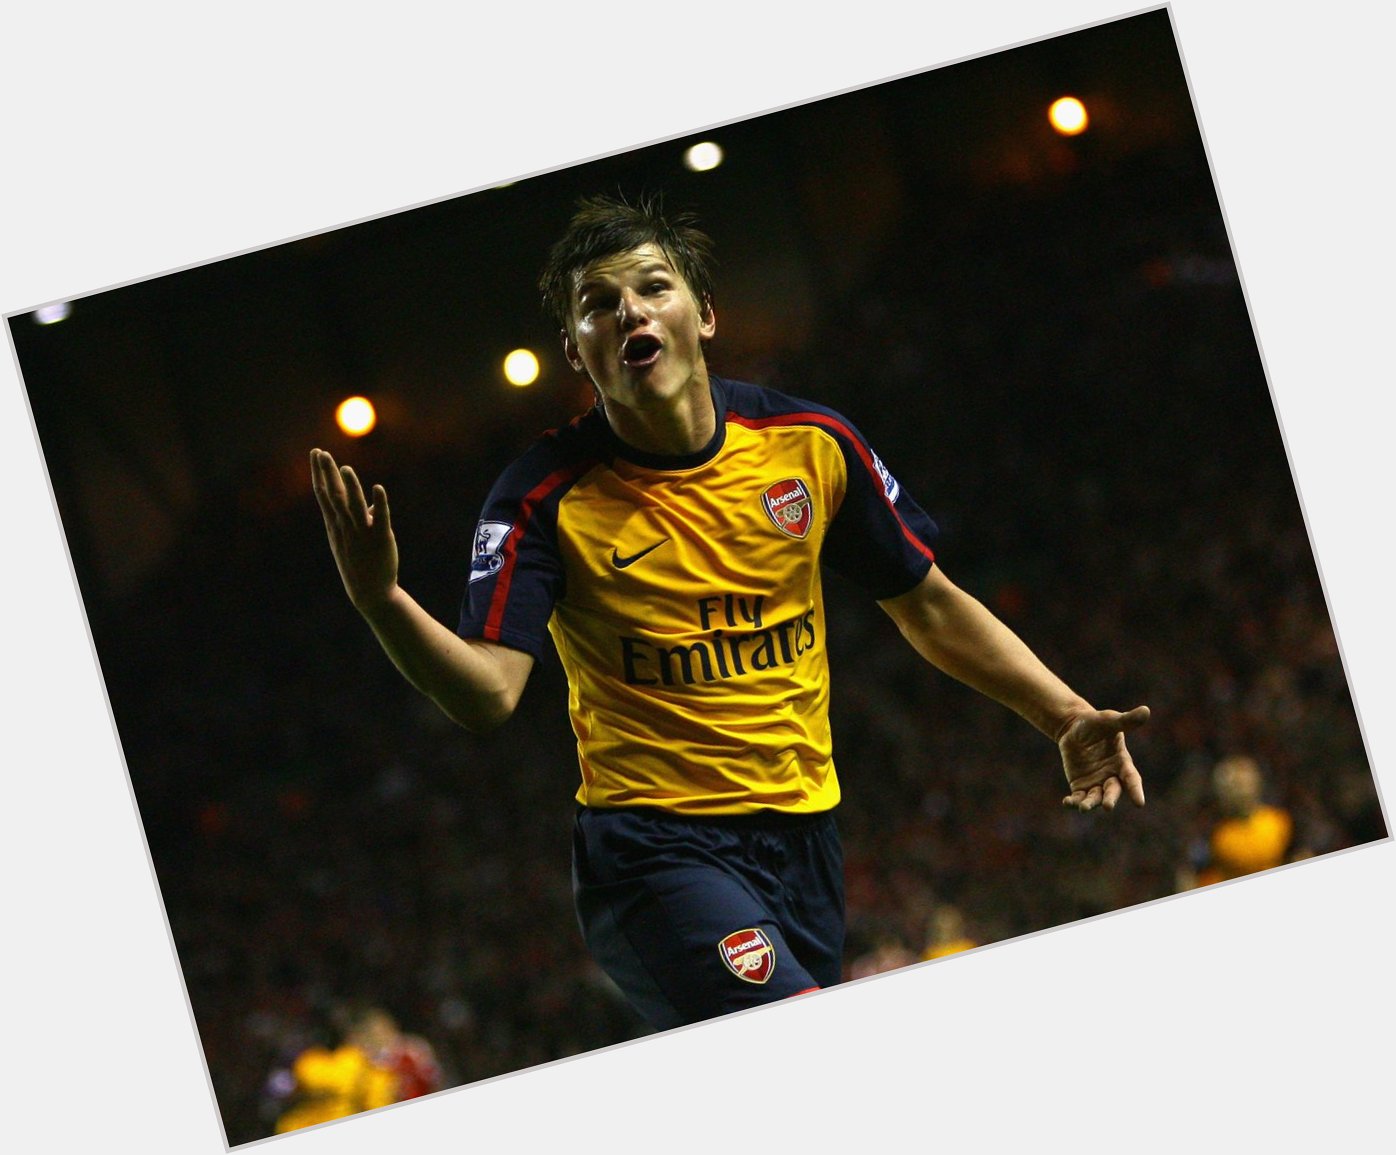 Happy 36th birthday to Andrey Arshavin. The only Arsenal player to score 4 goals in a single away game. 